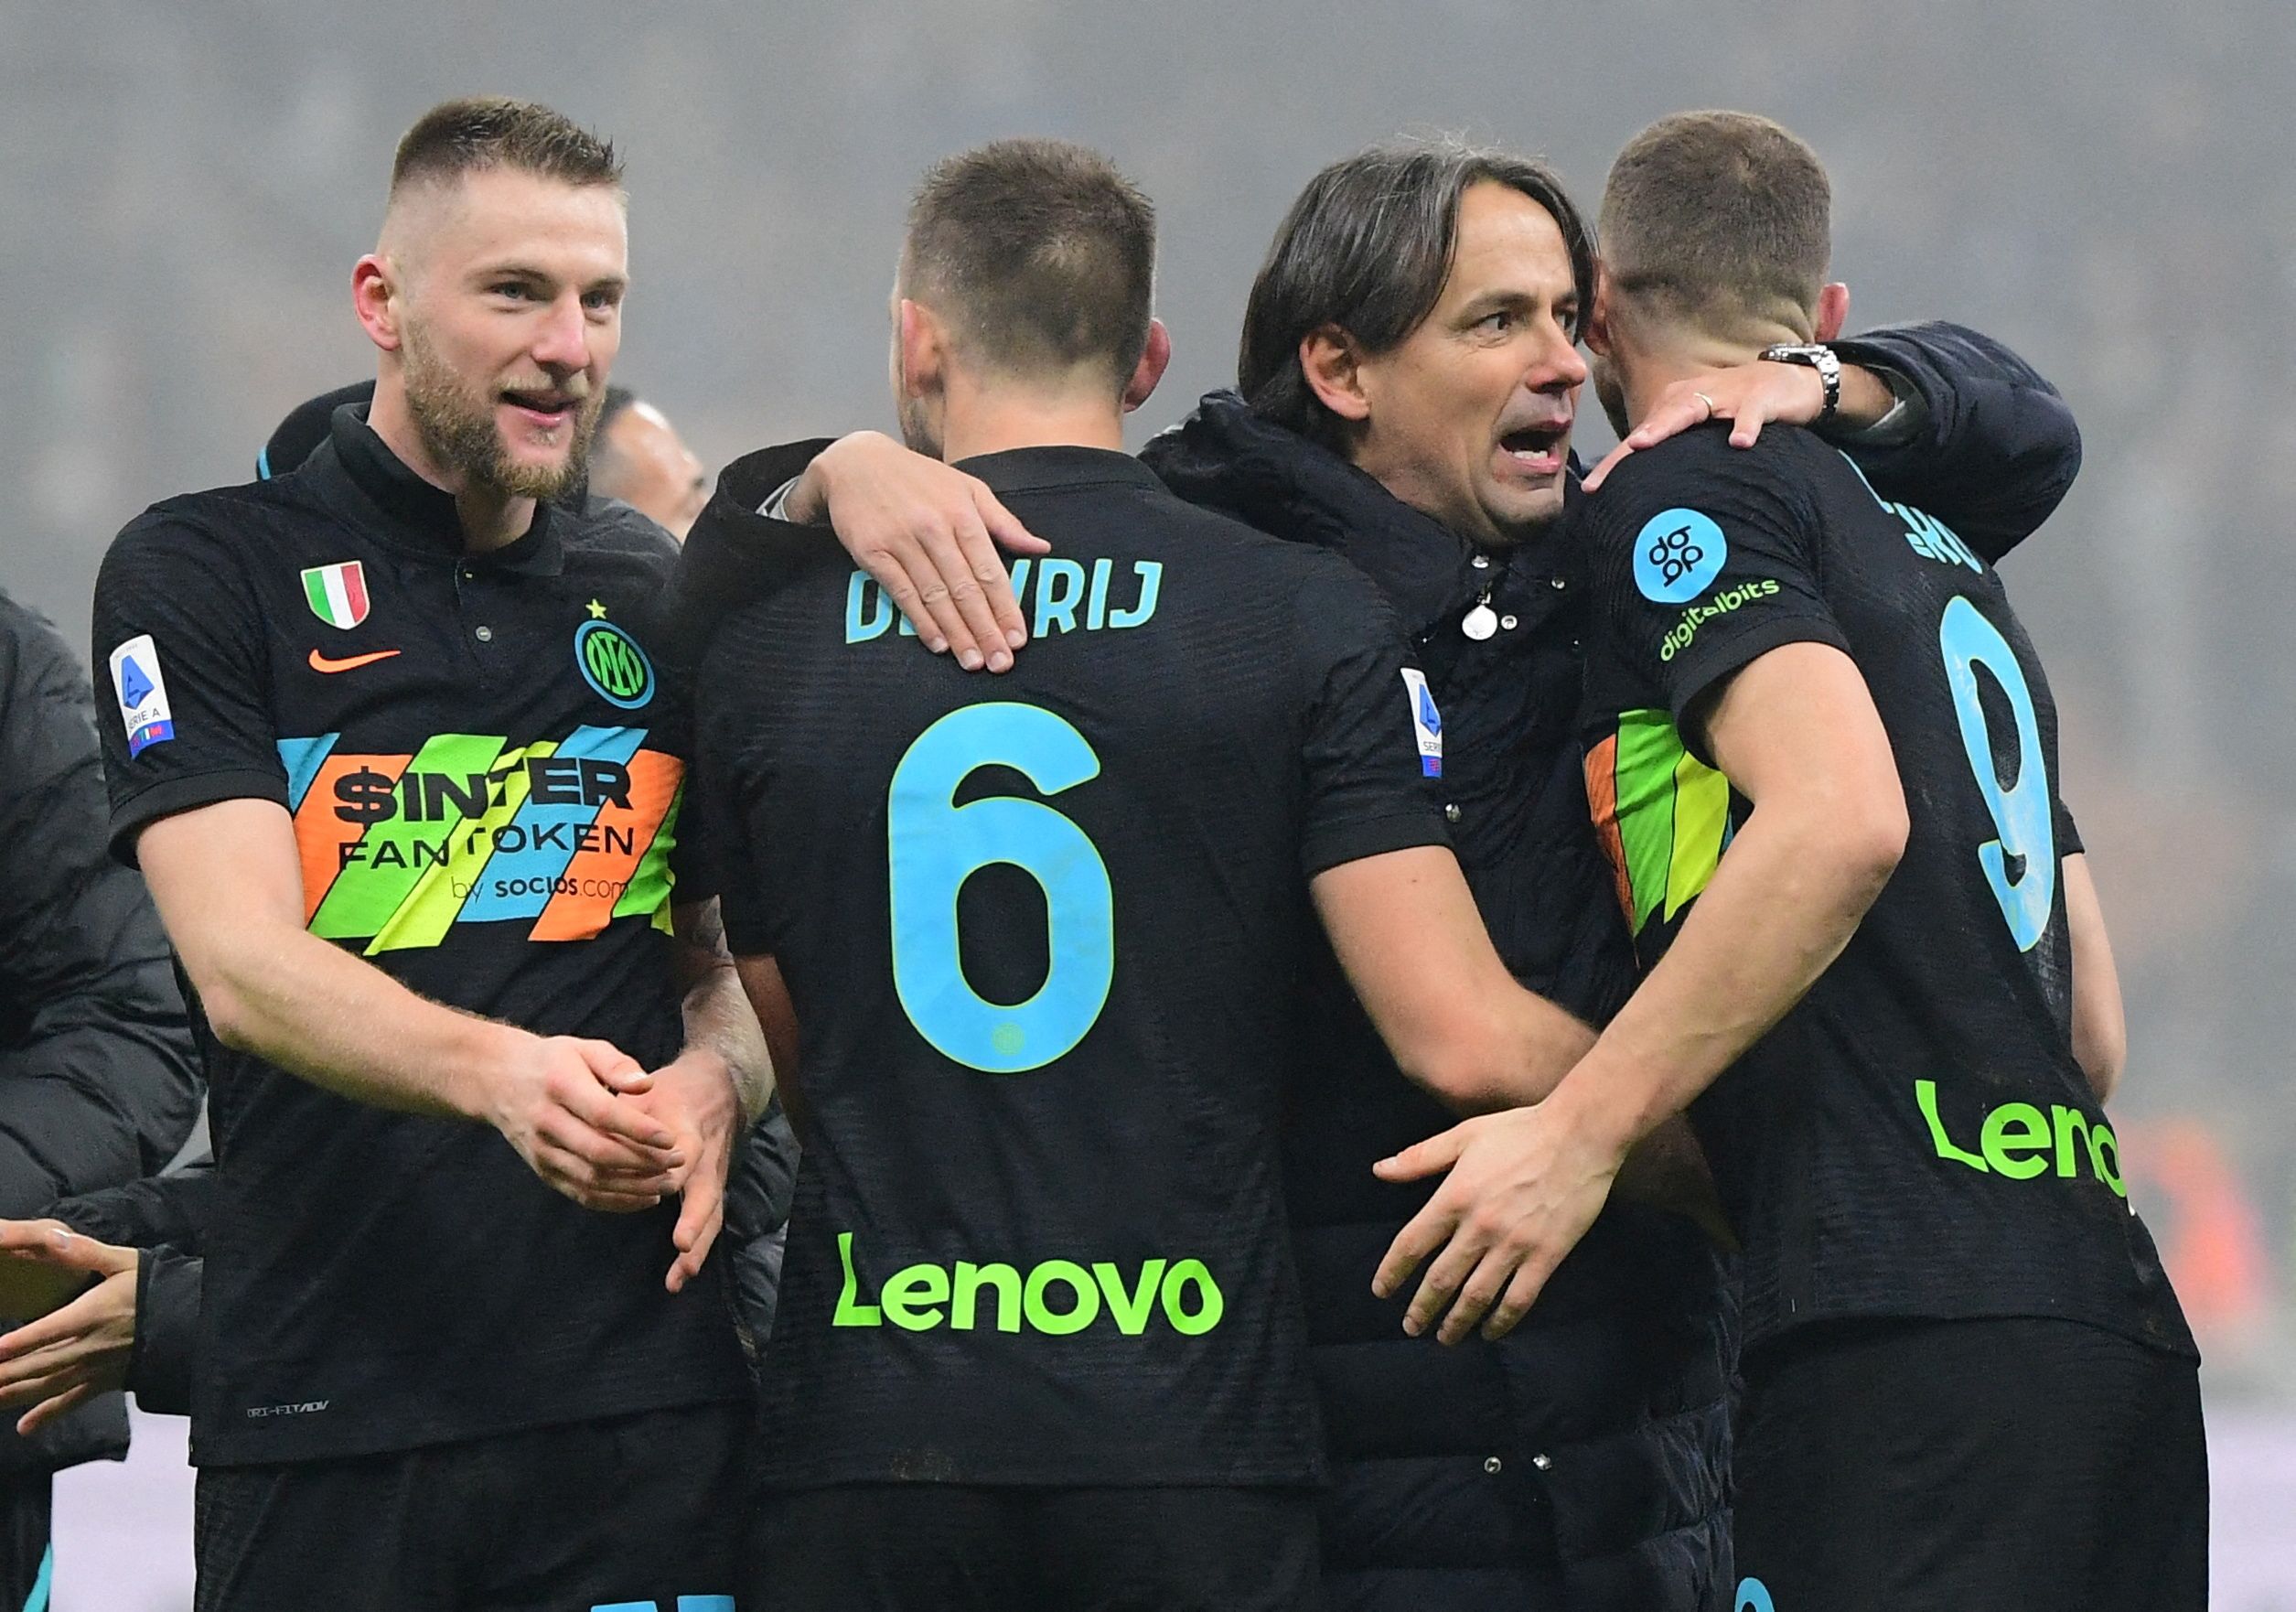 Inter - Sassuolo Bets, Odds and Lineups for the Serie A Match | February 20